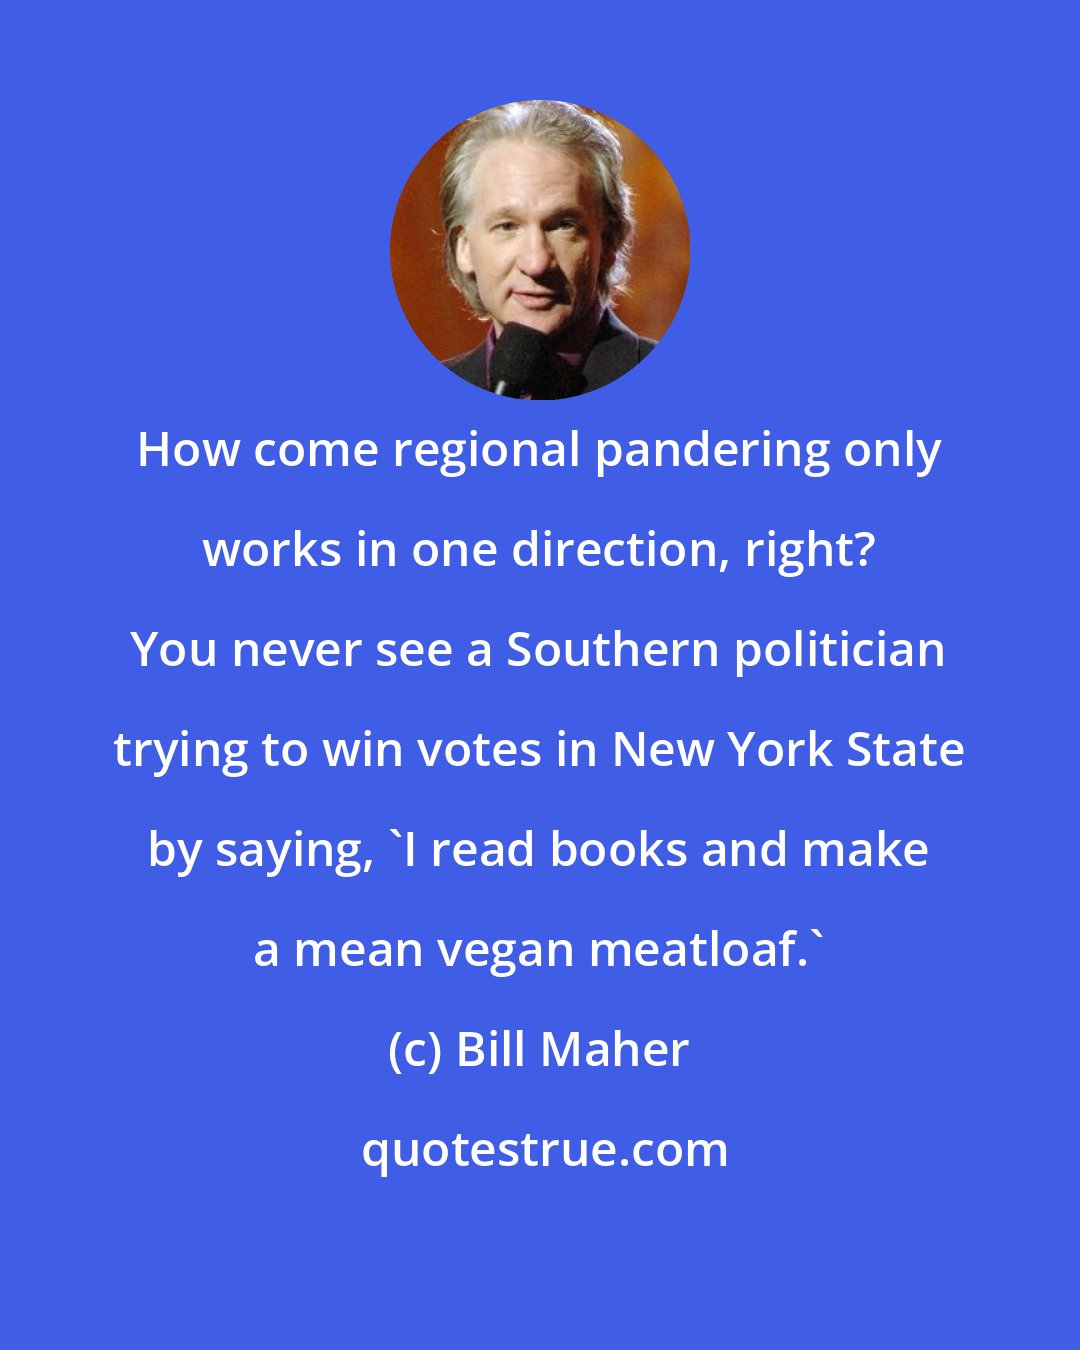 Bill Maher: How come regional pandering only works in one direction, right? You never see a Southern politician trying to win votes in New York State by saying, 'I read books and make a mean vegan meatloaf.'